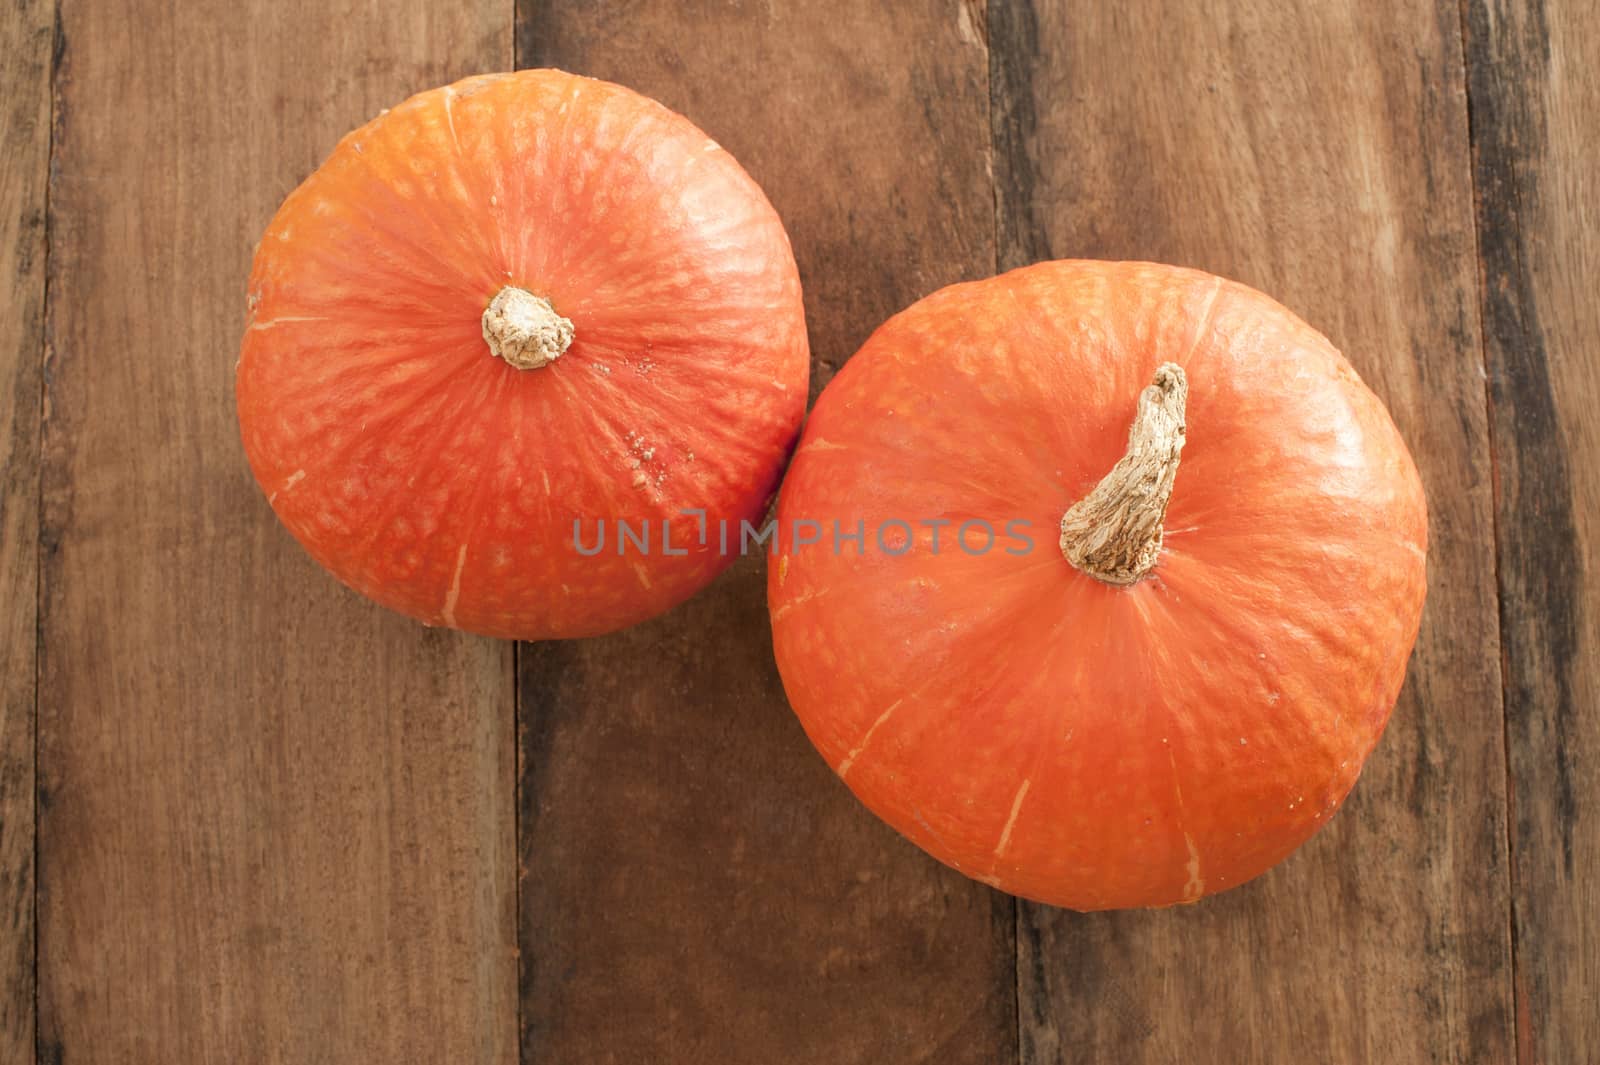 Top down view on small orange pumpkins by stockarch